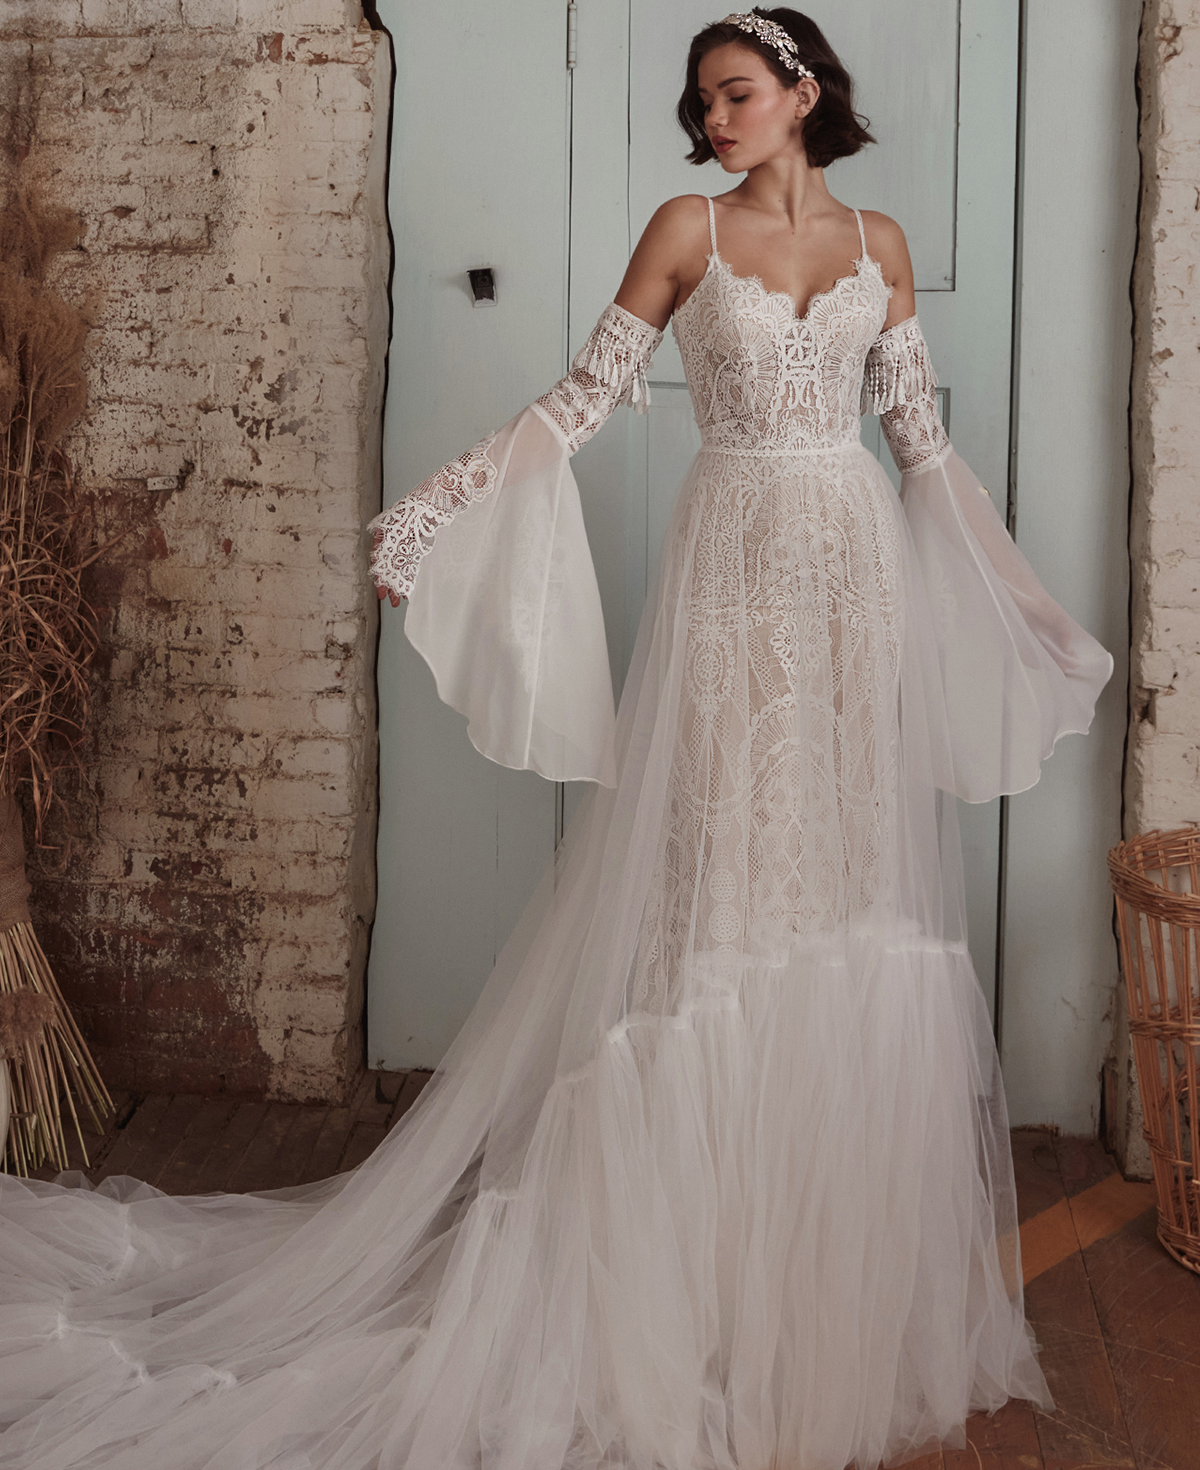 Vintage Boho Wedding Dress with Detachable Bell Sleeves and Overskirt